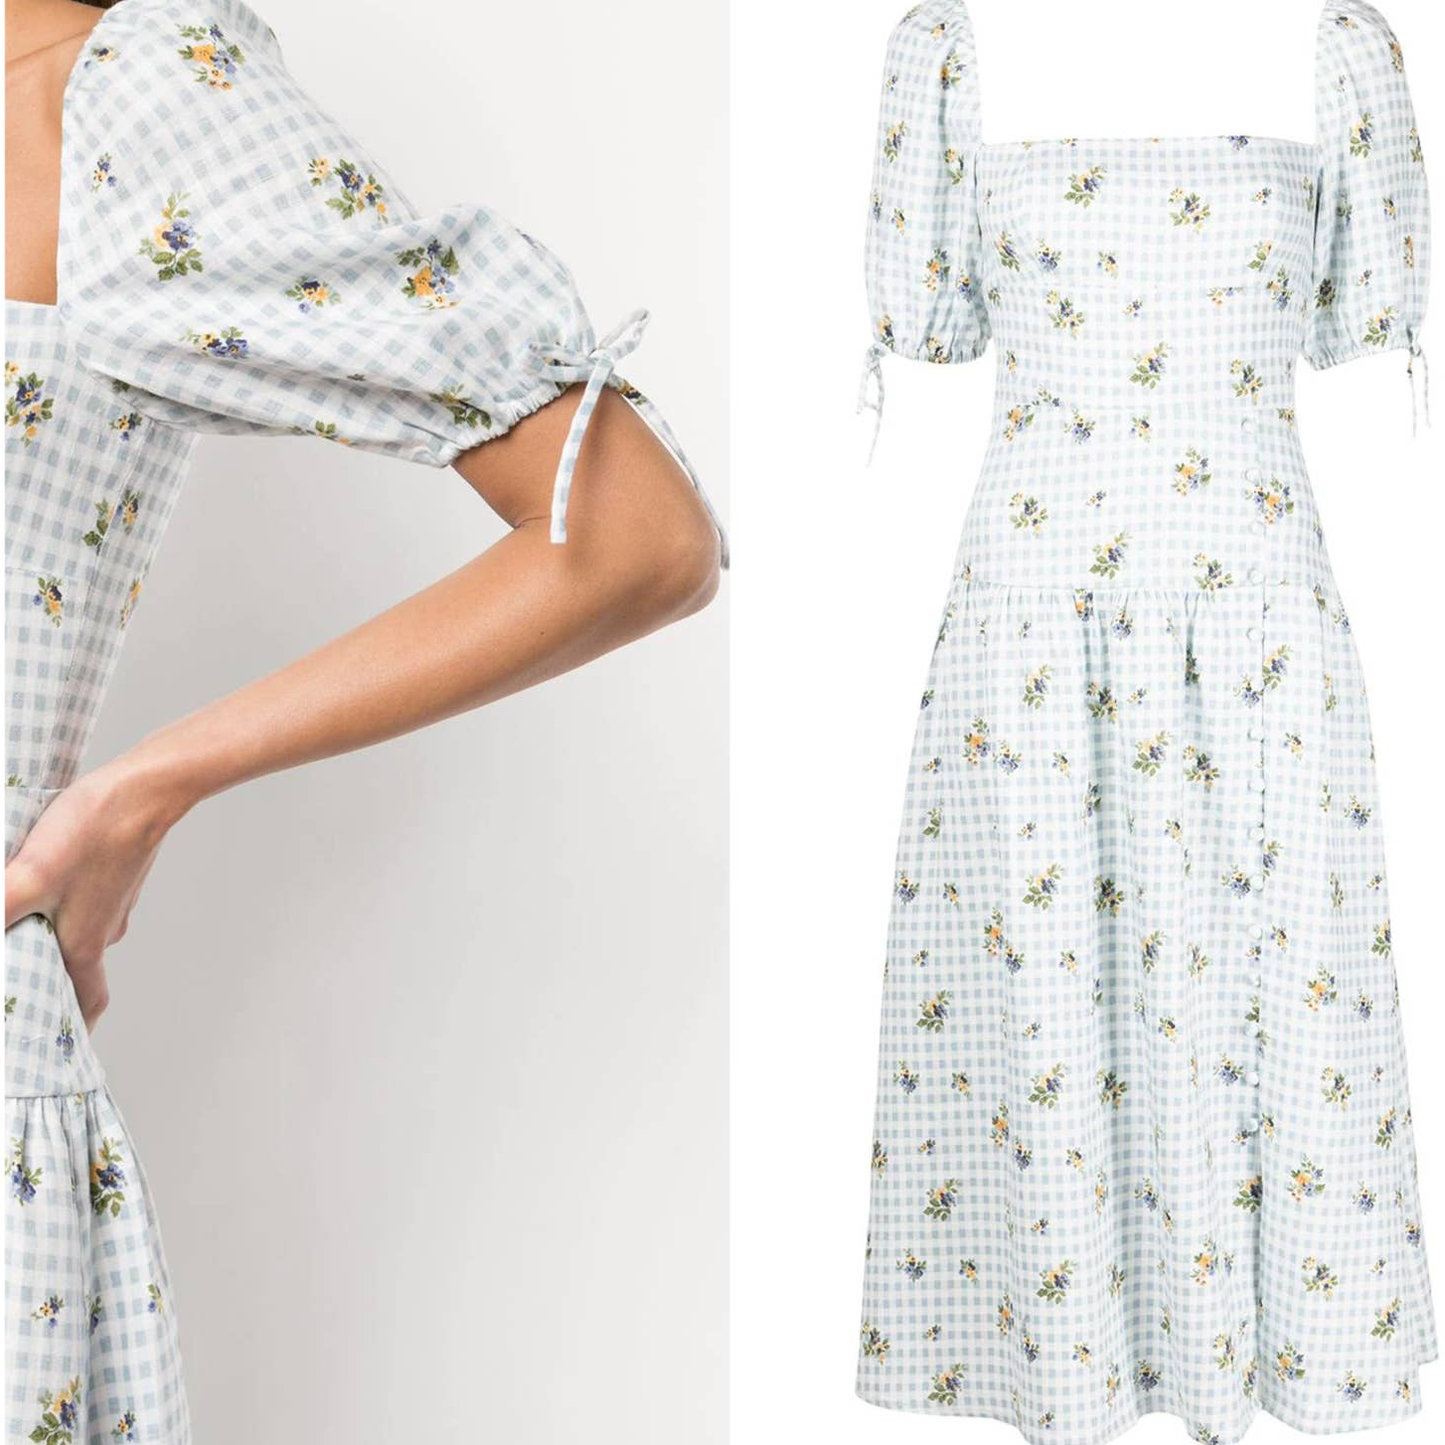 NWT Reformation Melony Floral Gingham Square Neck Linen Midi Dress Size 10